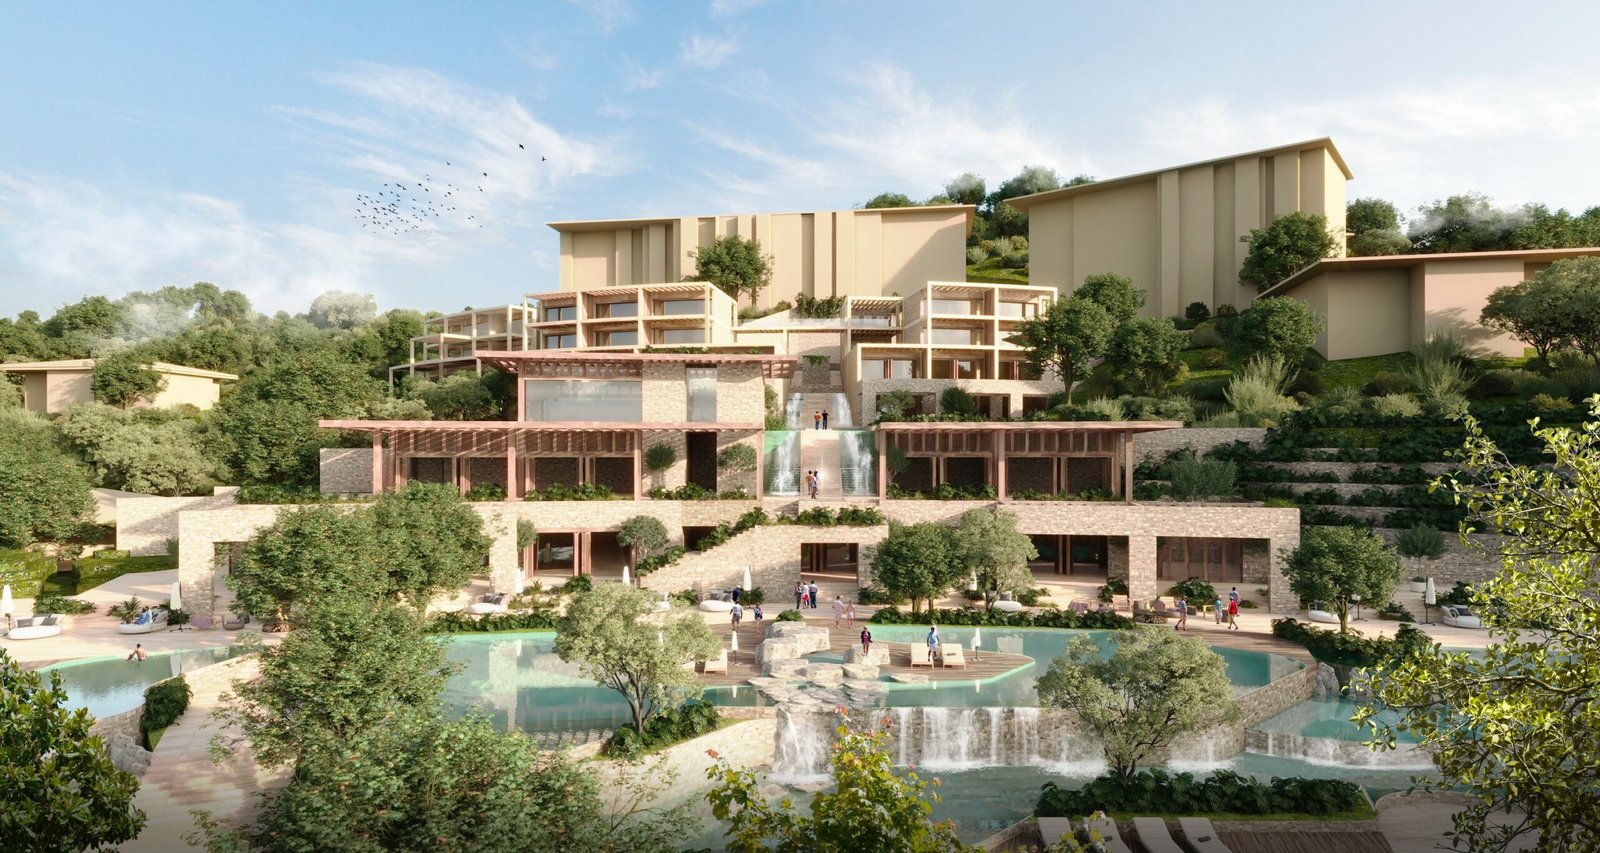 Hilton expands its portfolio of luxury hotels in the Caribbean and Latin America with First Waldorf Astoria Hotels & Resorts Property in Costa Rica